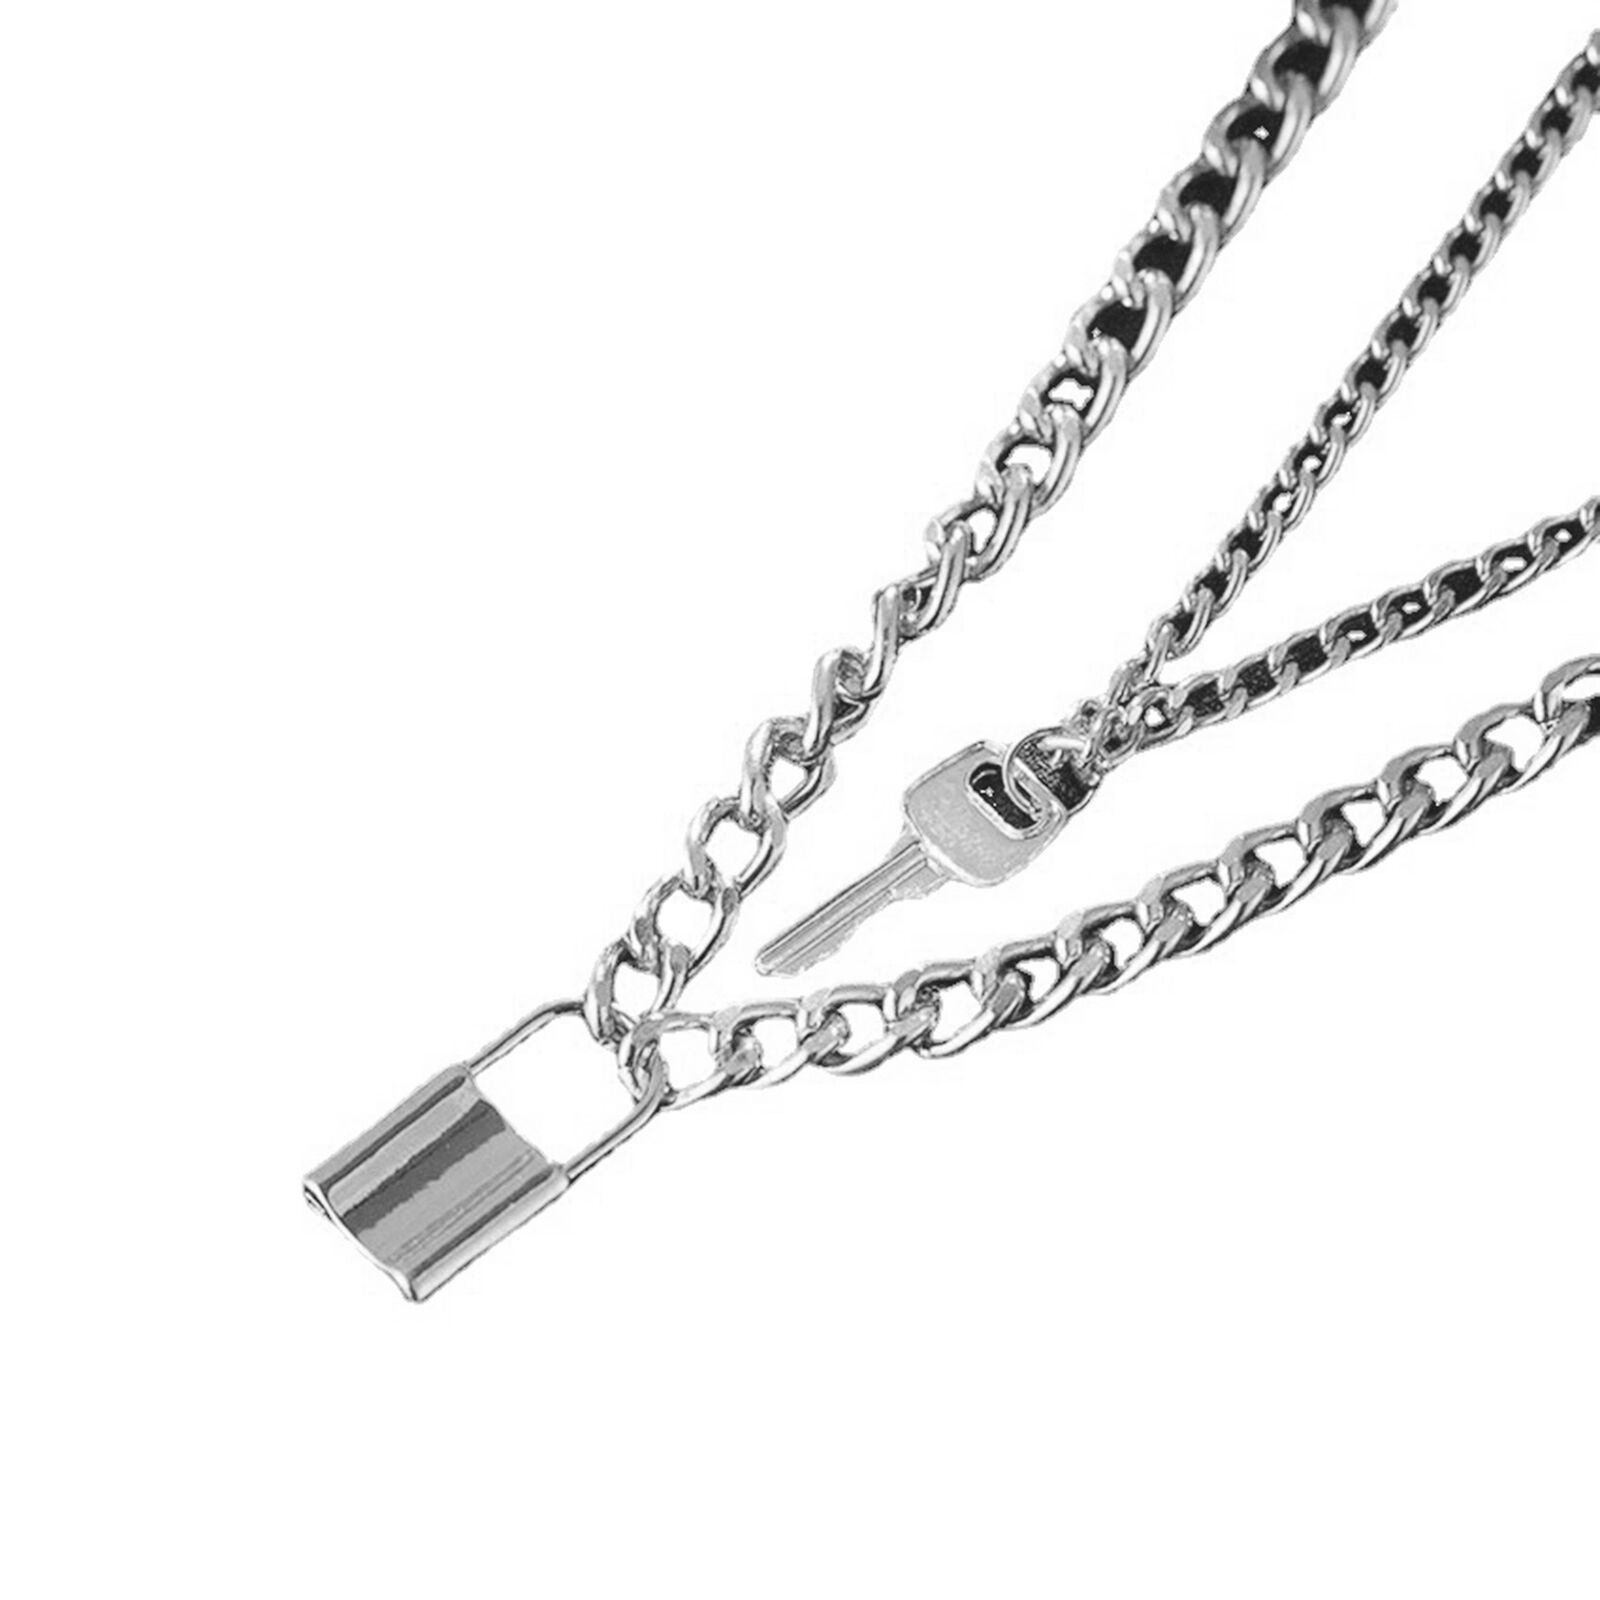 Retro Key Lock Necklace Exquisite Design Stainless Steel Pendant with Double